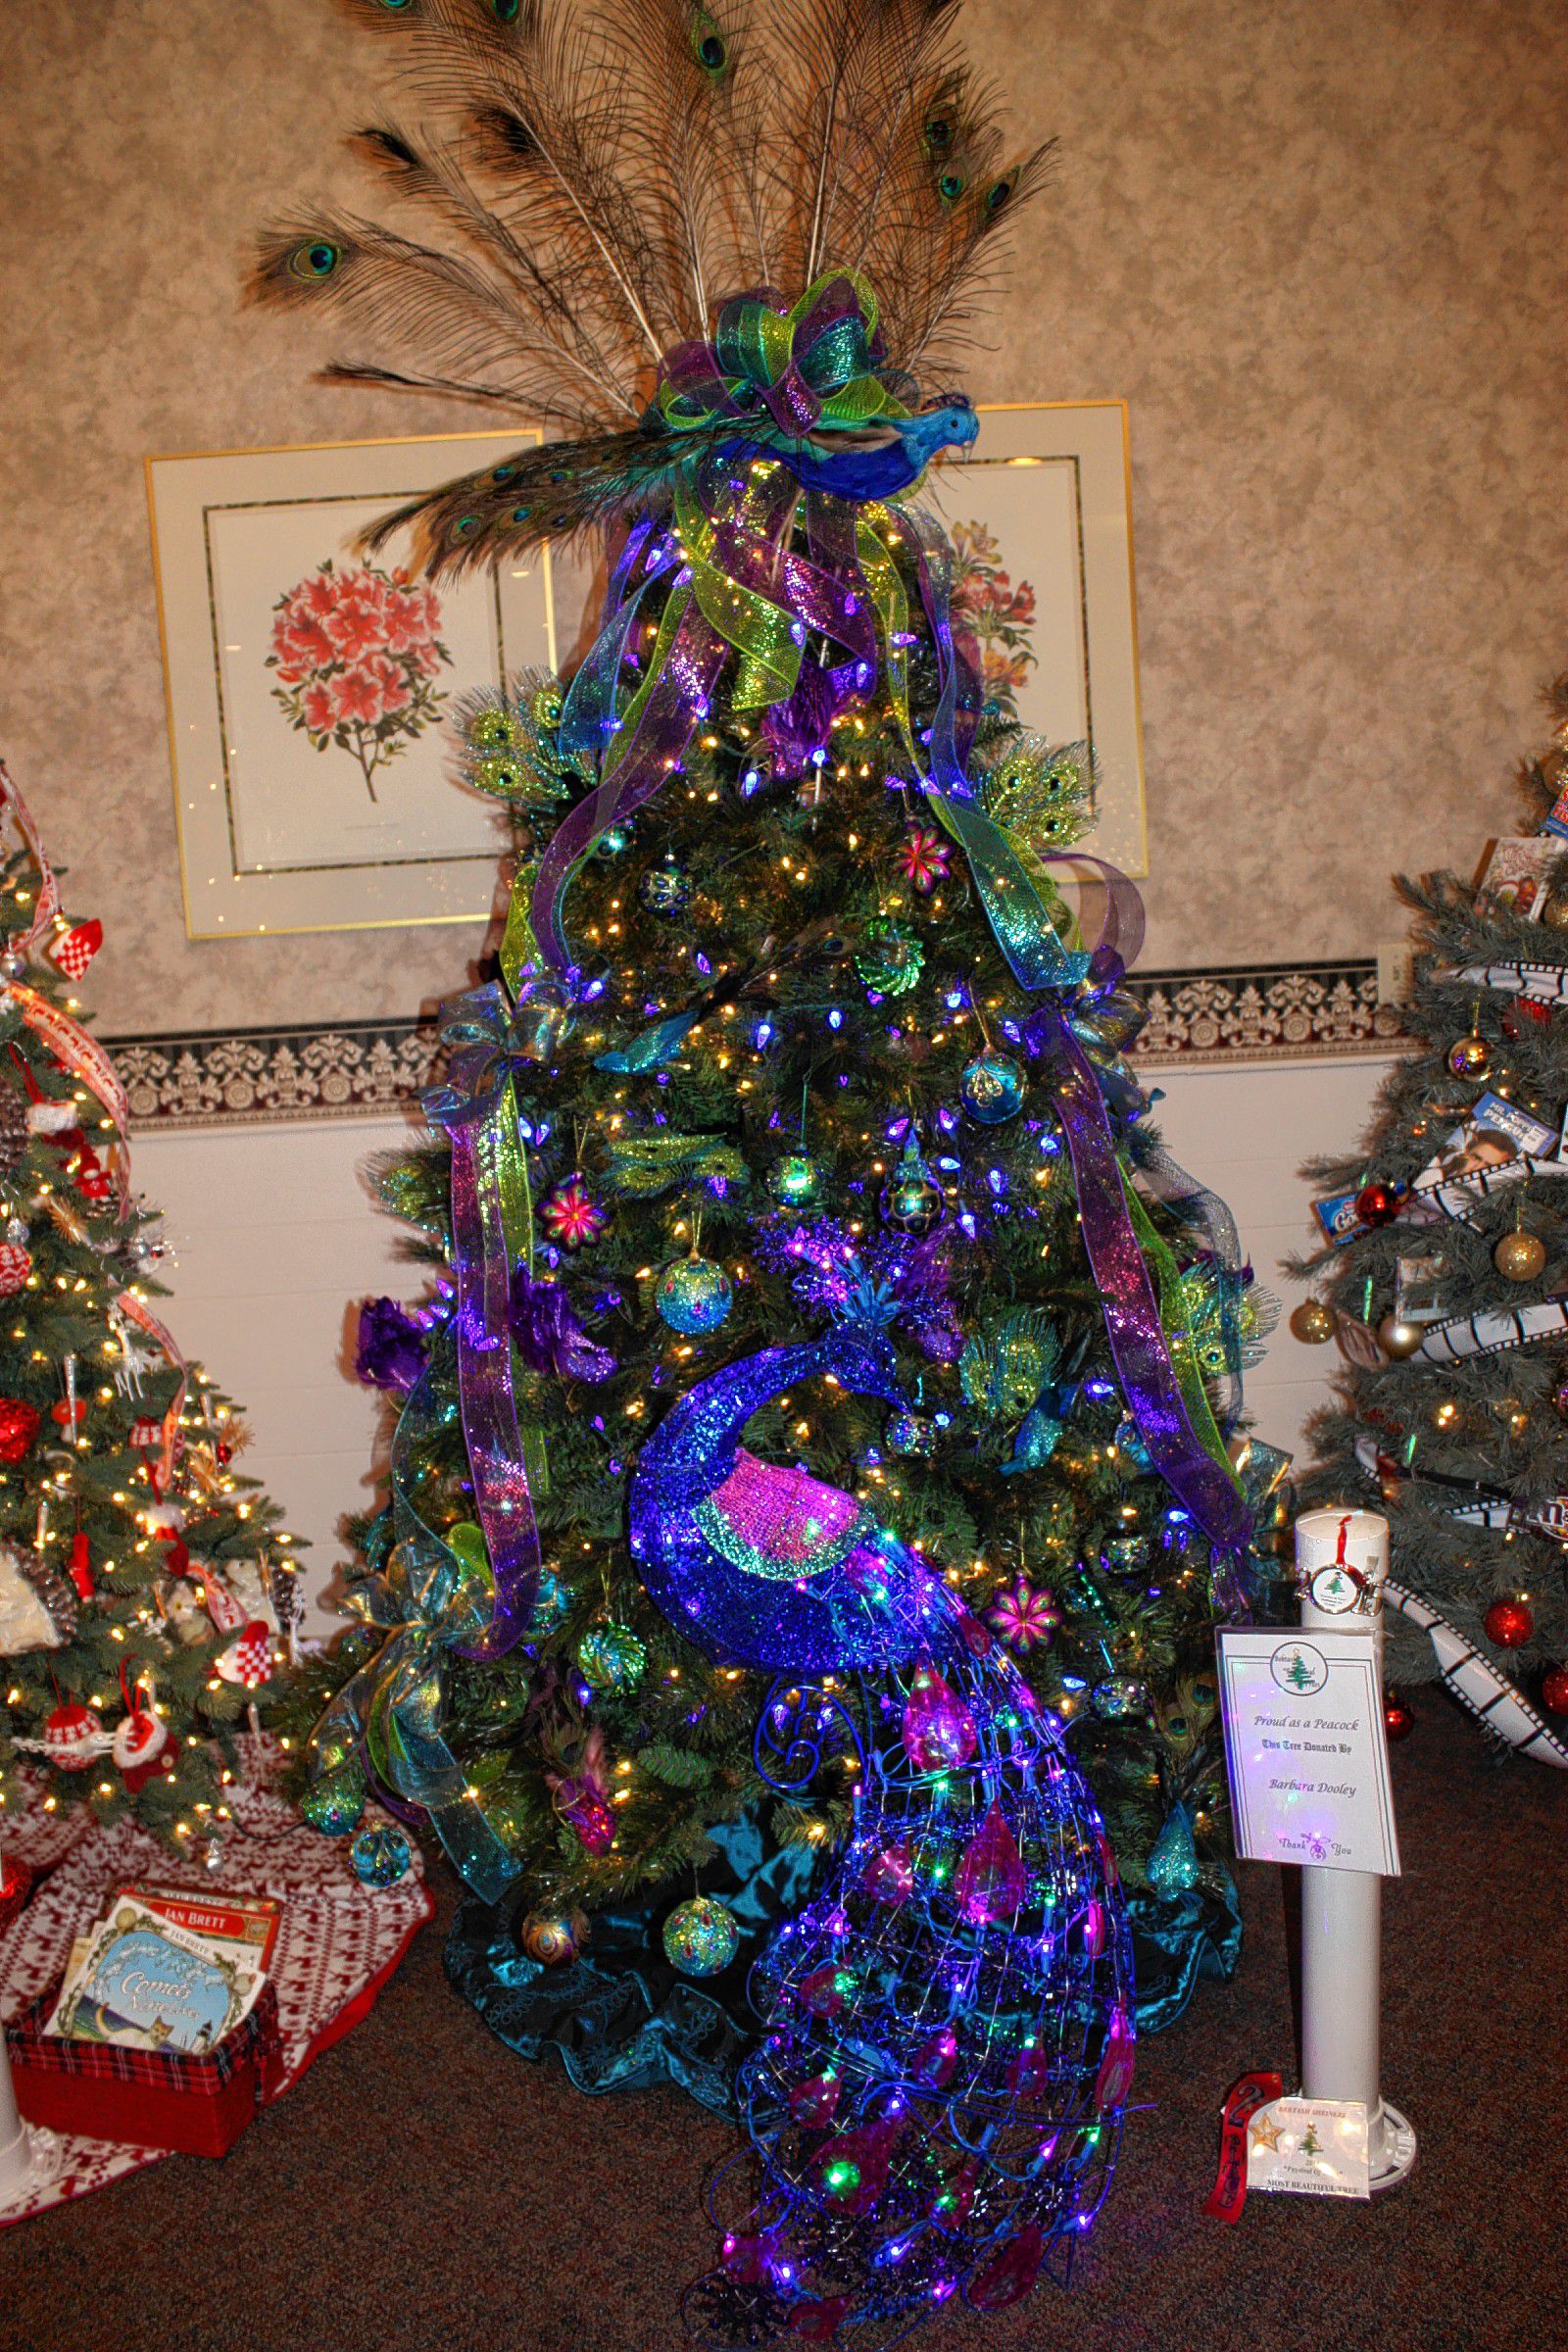 Try to win one of more than 100 fake trees at the Feztival of Trees